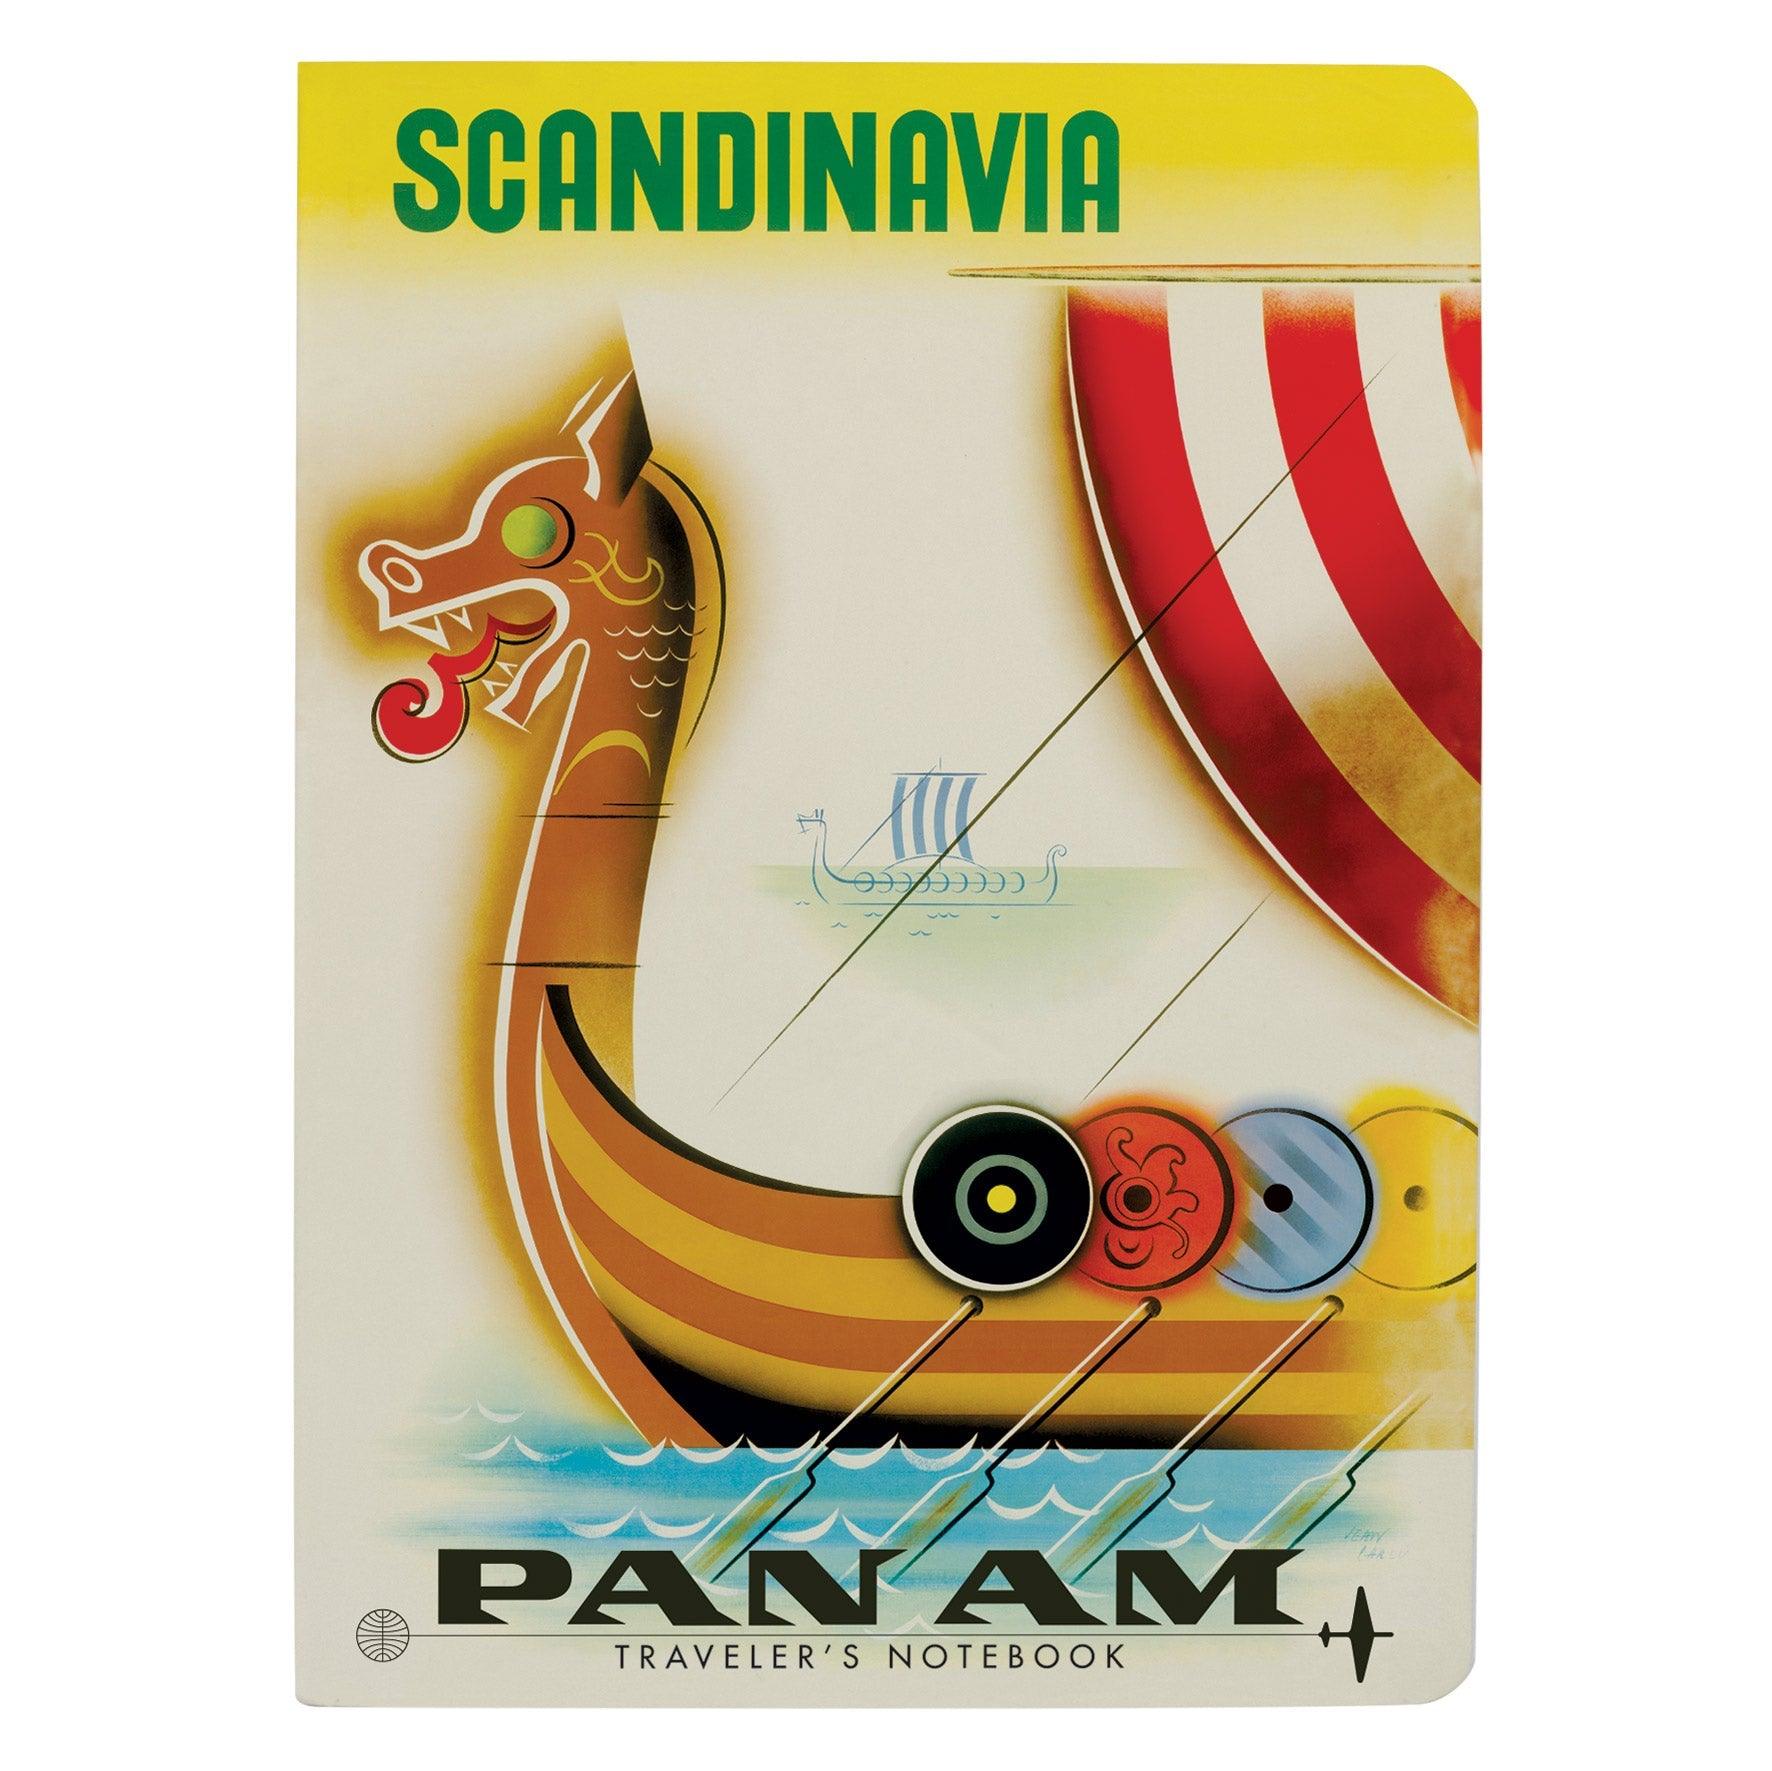 Product photo of Pan Am Scandinavia Notebook, a novelty gift manufactured by The Unemployed Philosophers Guild.